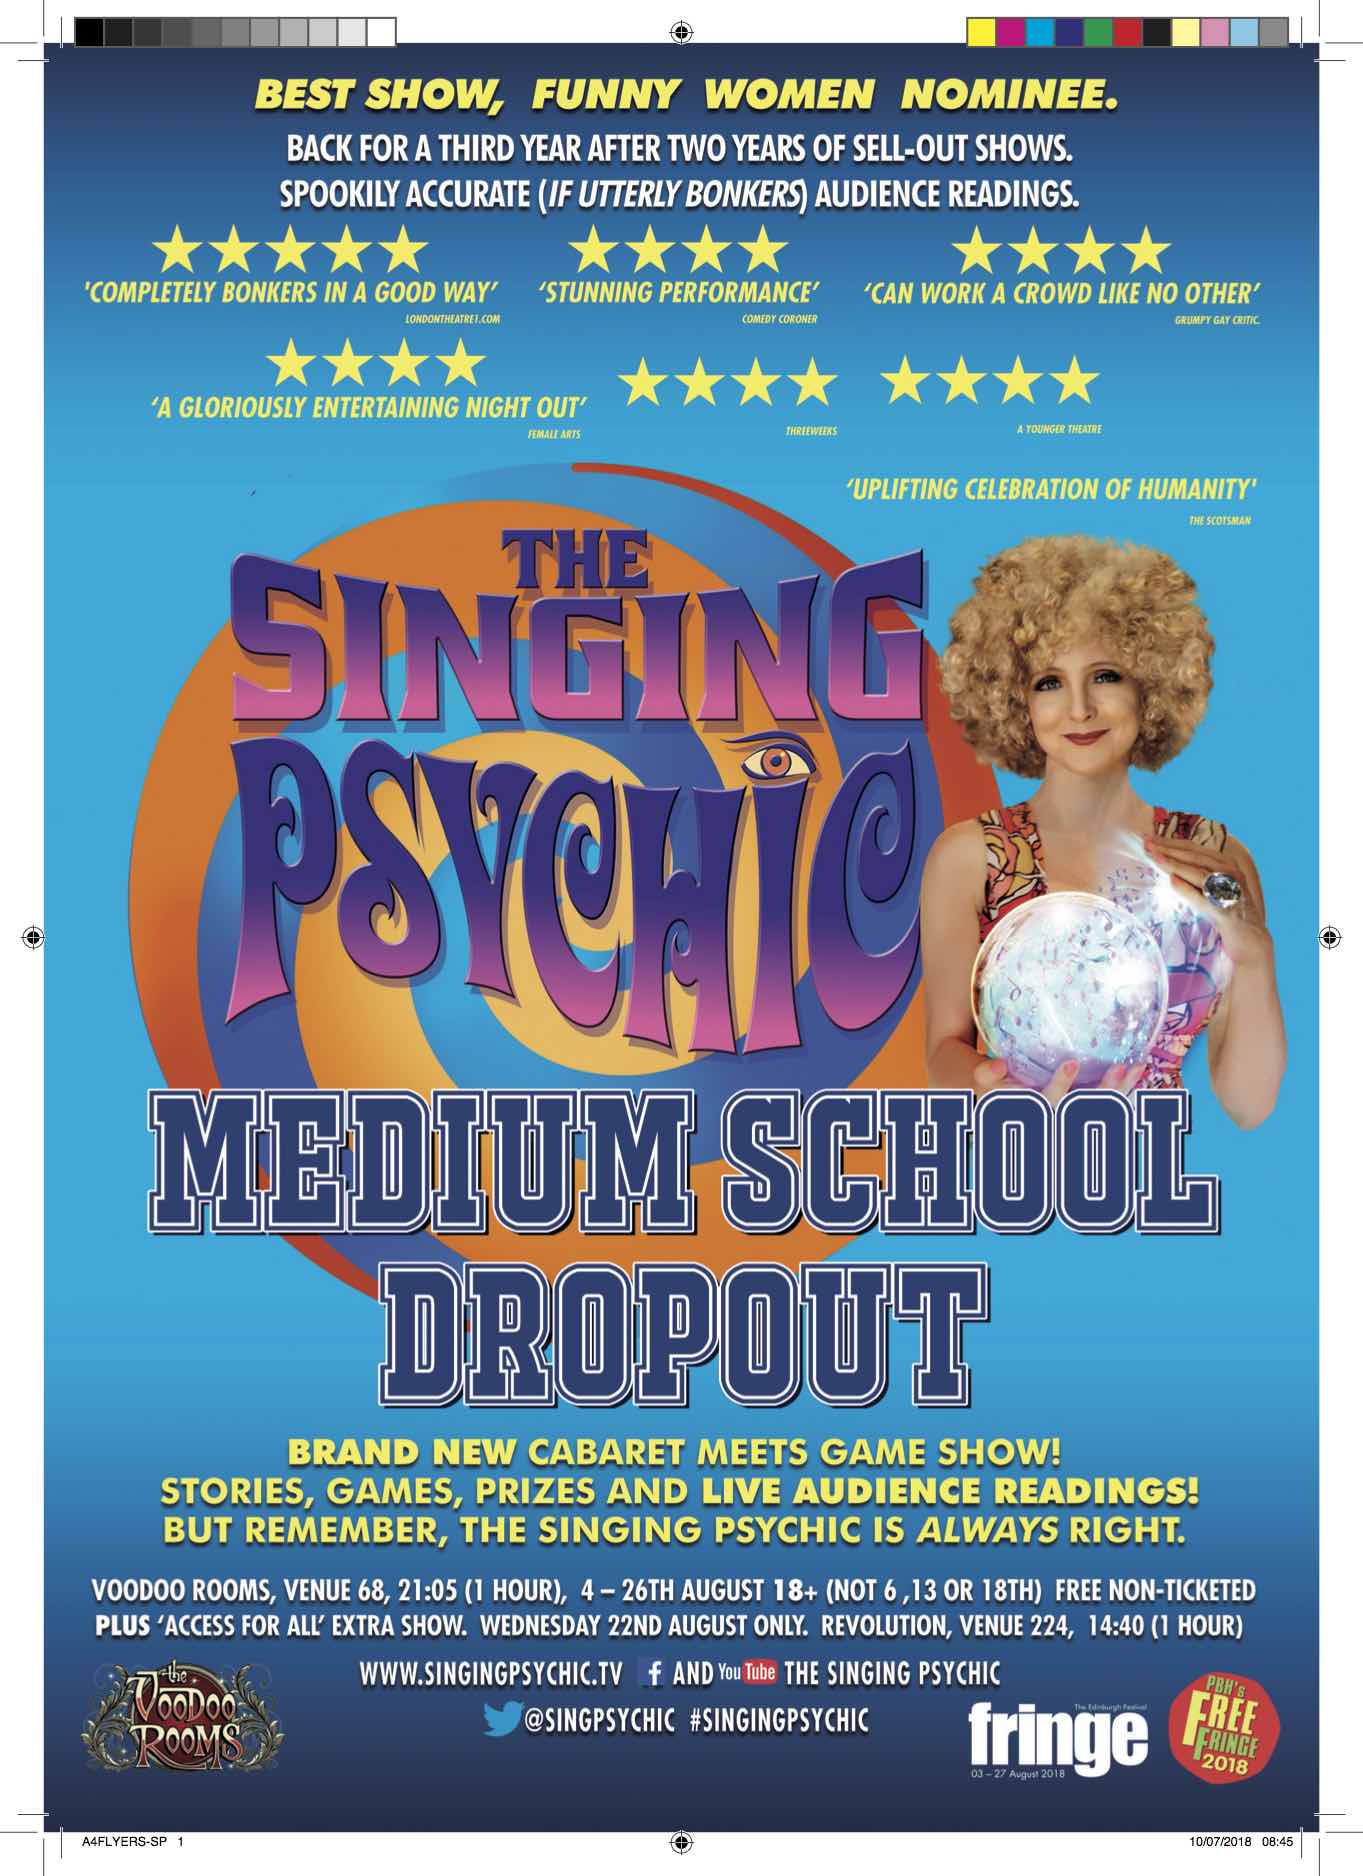 Back At Edinburgh Fringe For The 3rd Year With A Brand New Singing Psychic Show The Singing